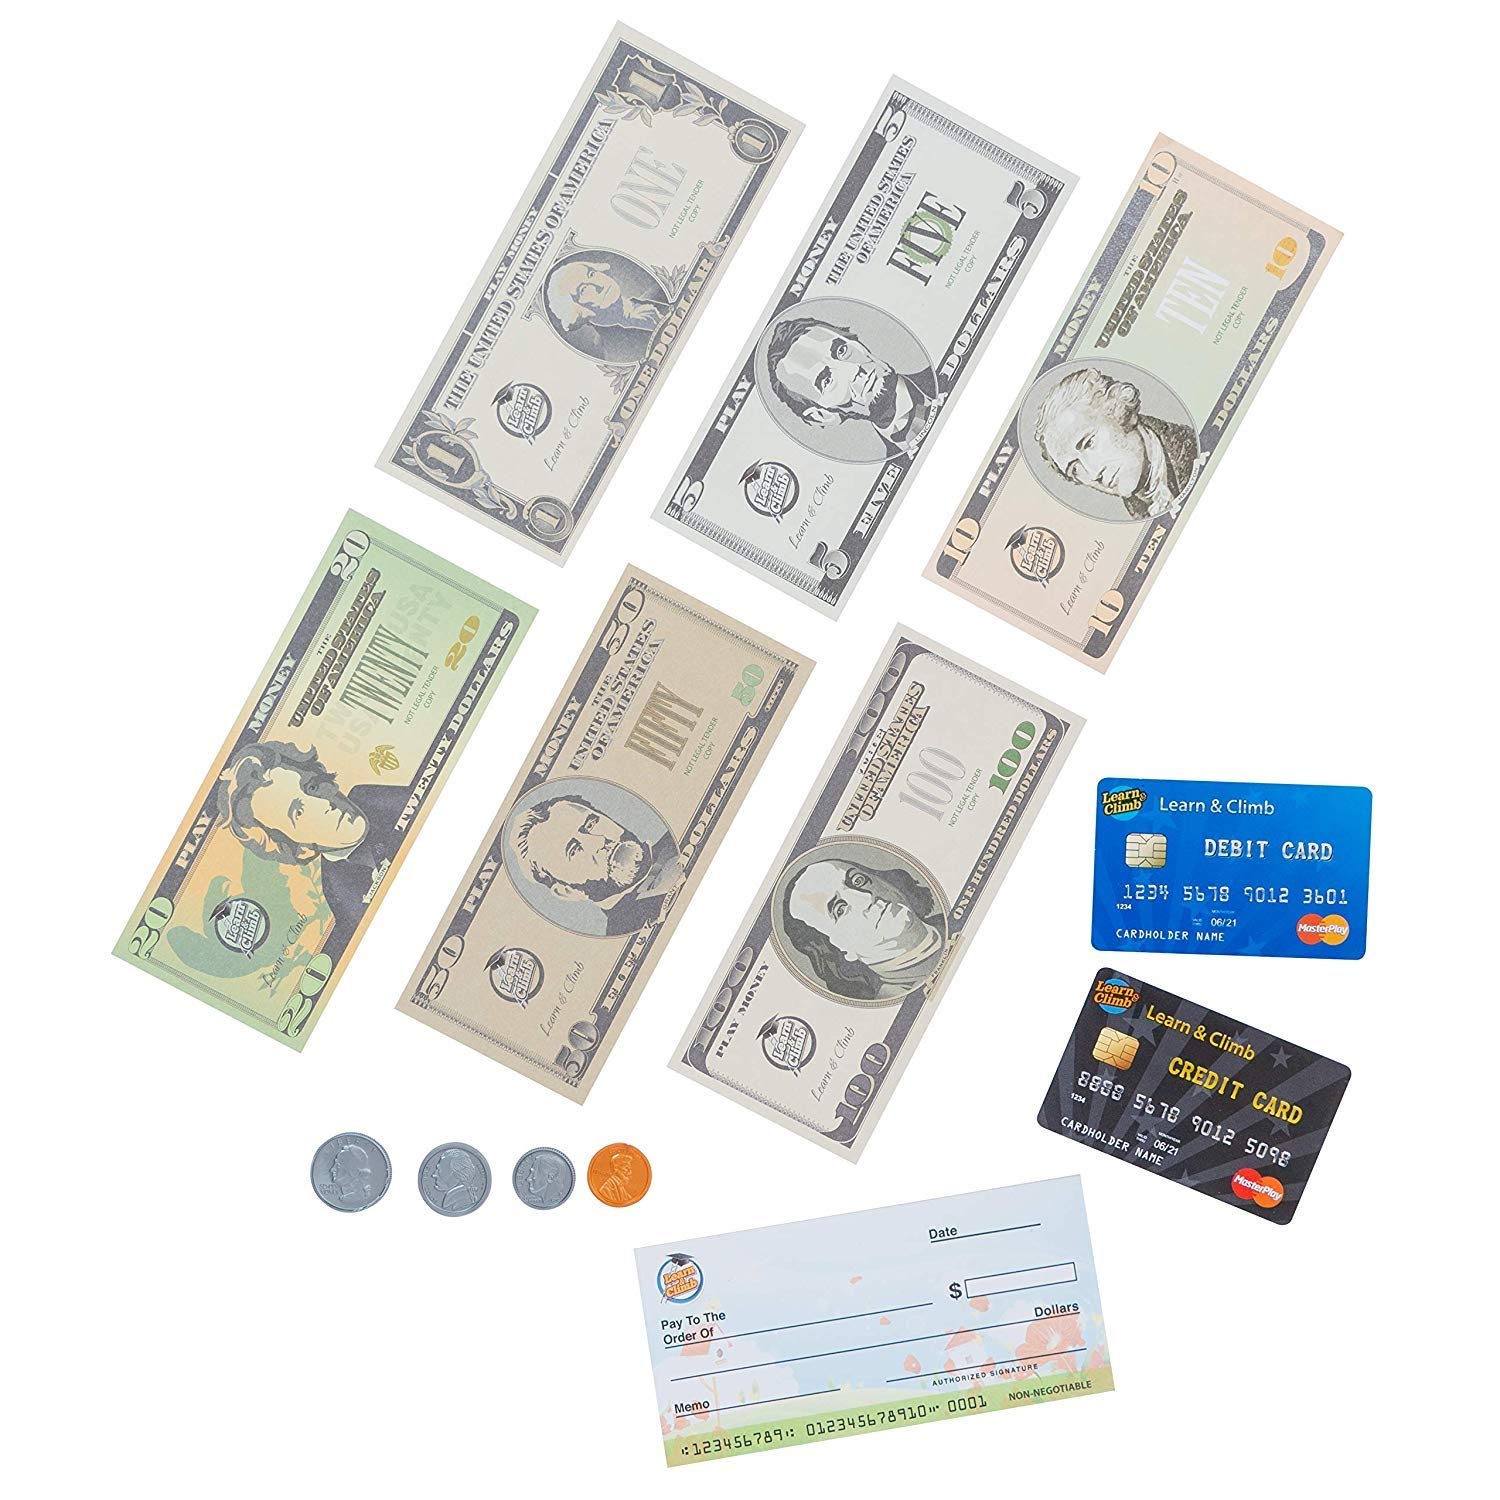 Play Money for kids – Looks Real Play Money Set for Pretend Play & Learning. Contains: Bills, Coins, Credit & Debit Cards and Checkbook